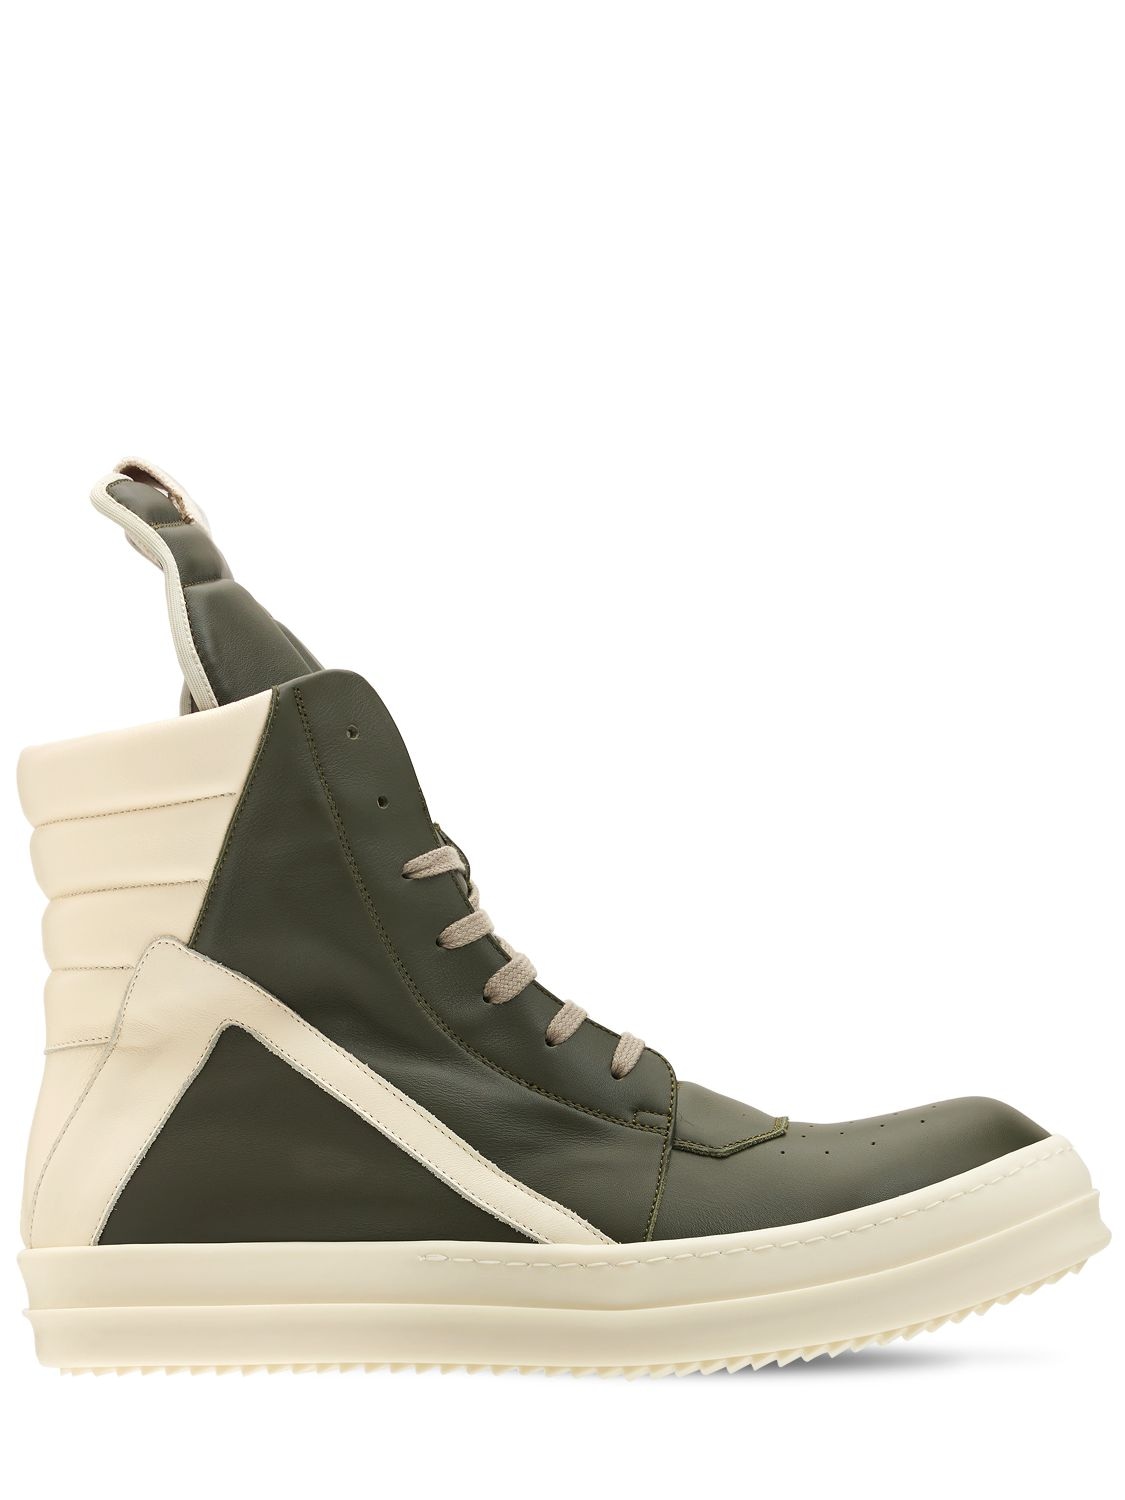 RICK OWENS GEOBASKET LEATHER HIGH TOP SNEAKERS,74IATF007-MTUXMTE1